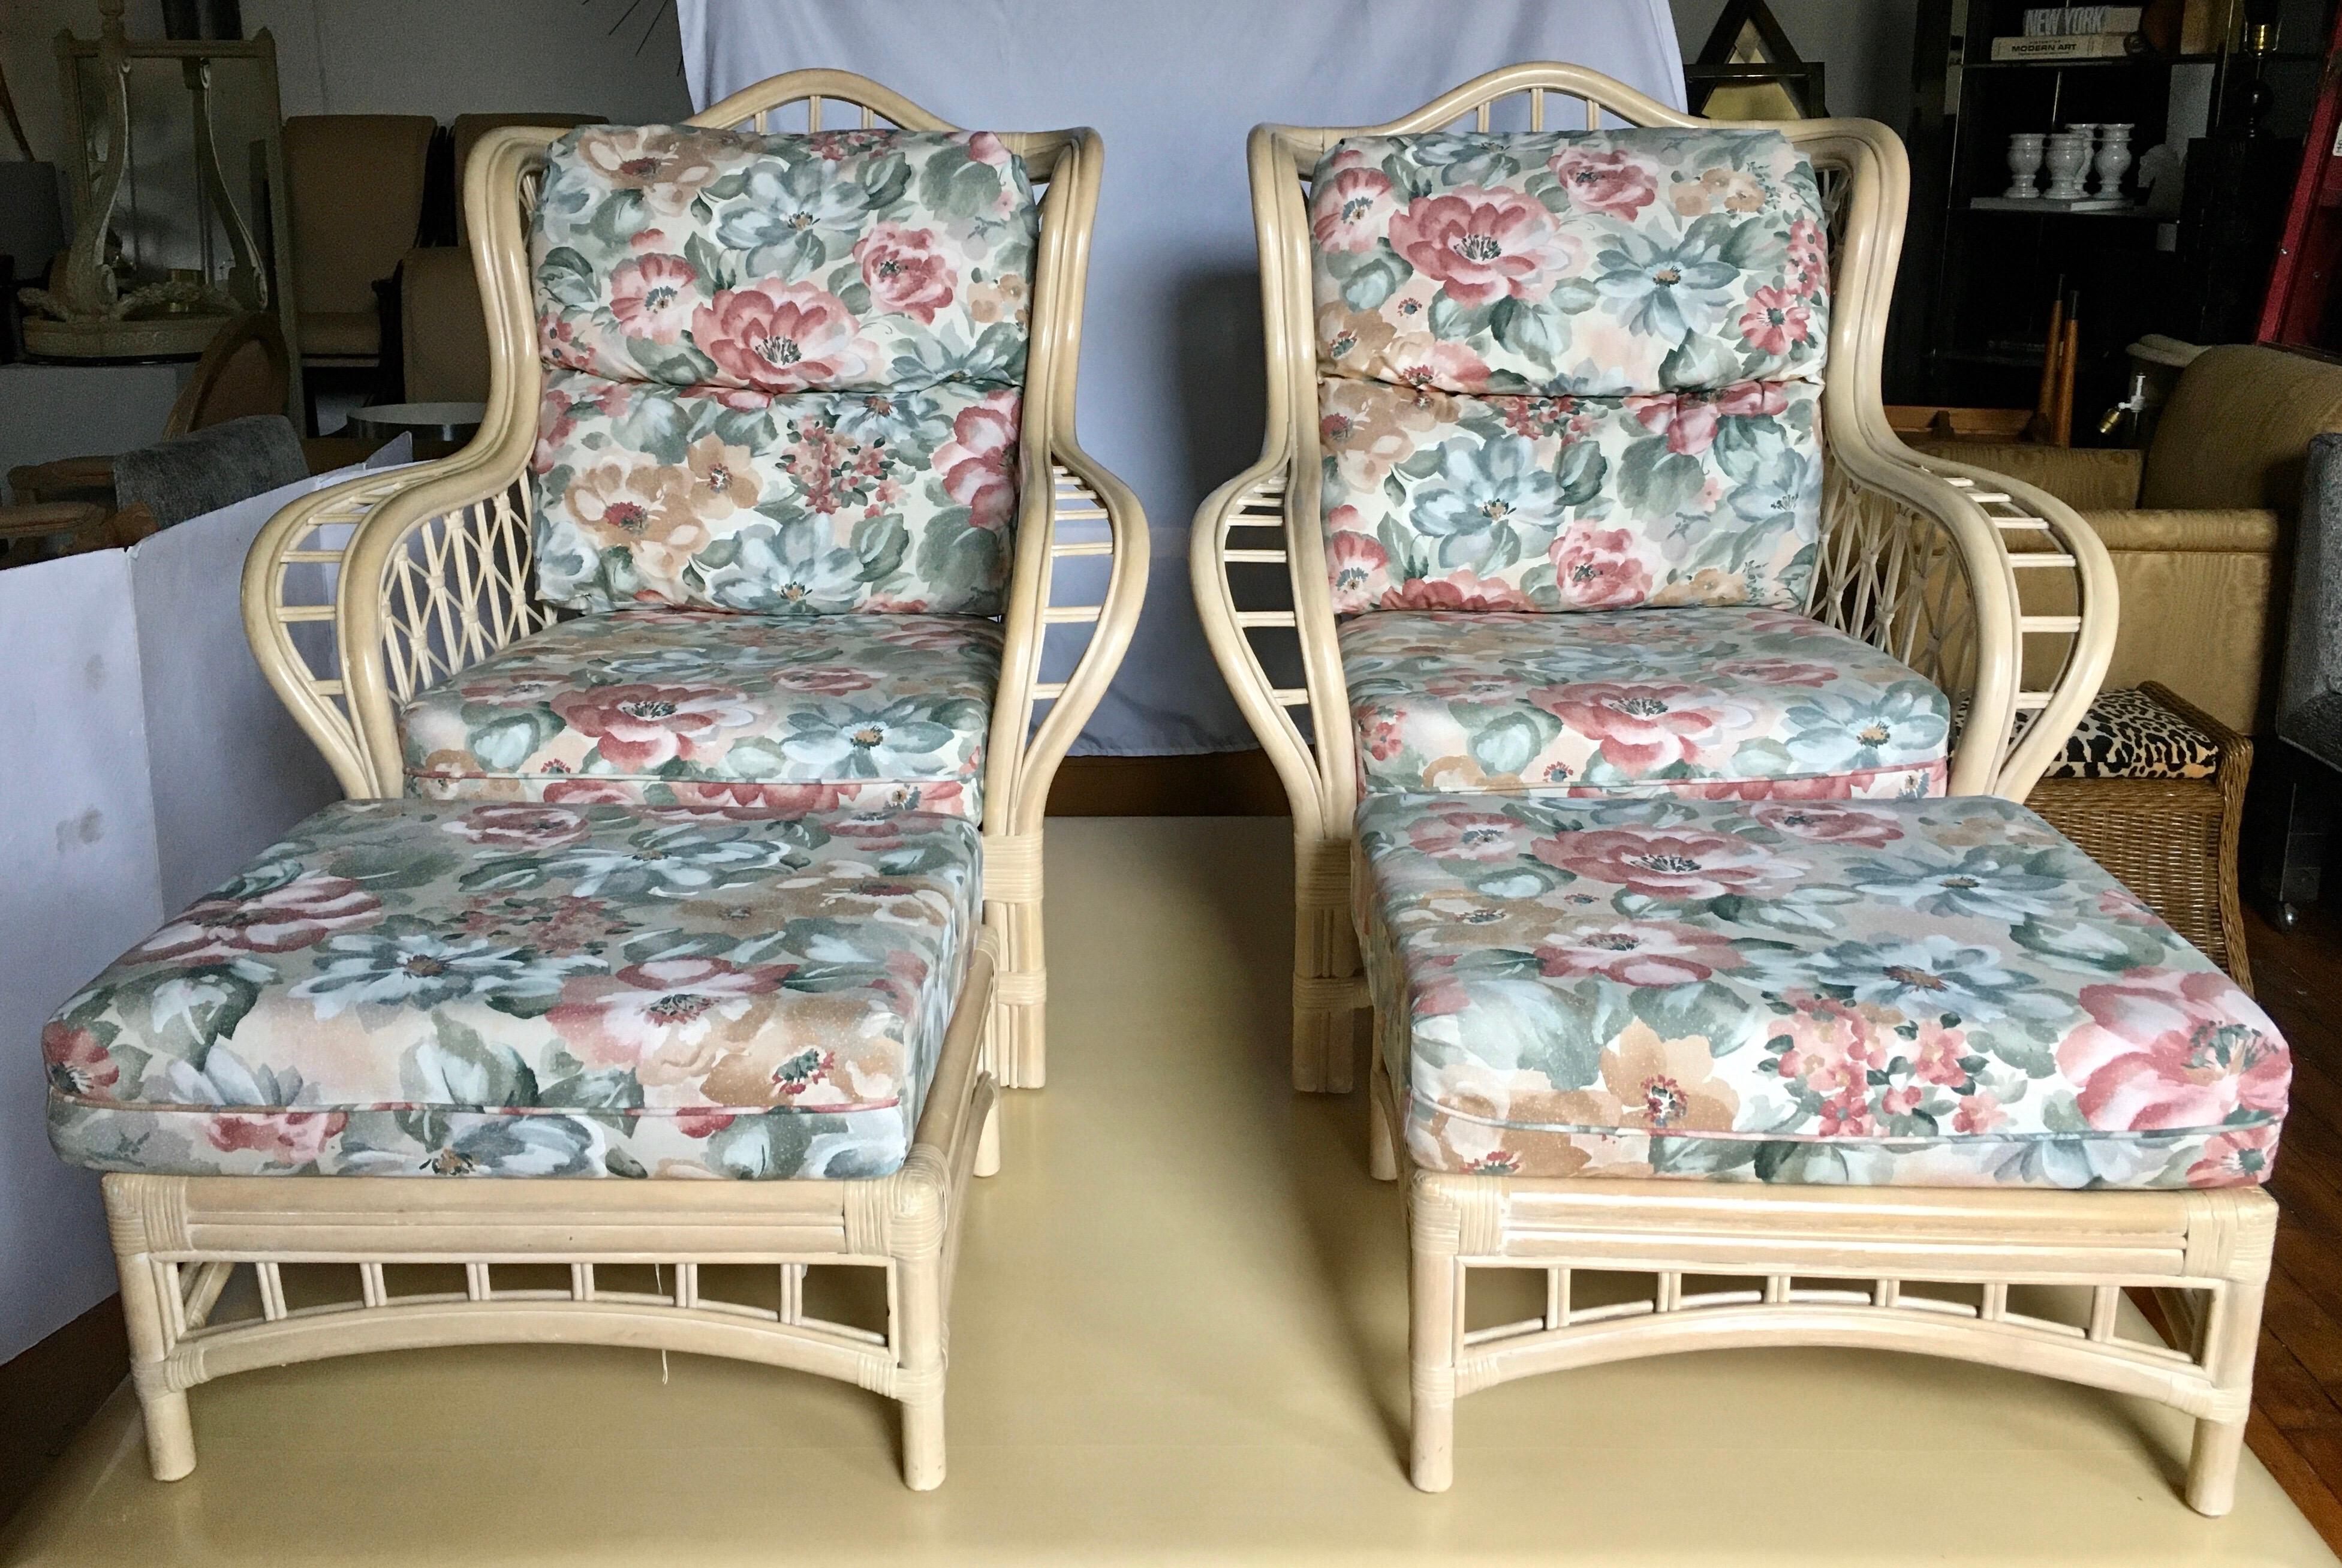 Pair of rattan faux bamboo wing chairs and ottomans by Lane. These large sculptural curved lounge chairs have original removable seat and back floral print cushions which can easily be reupholstered. Pair of ottomans also have original removable